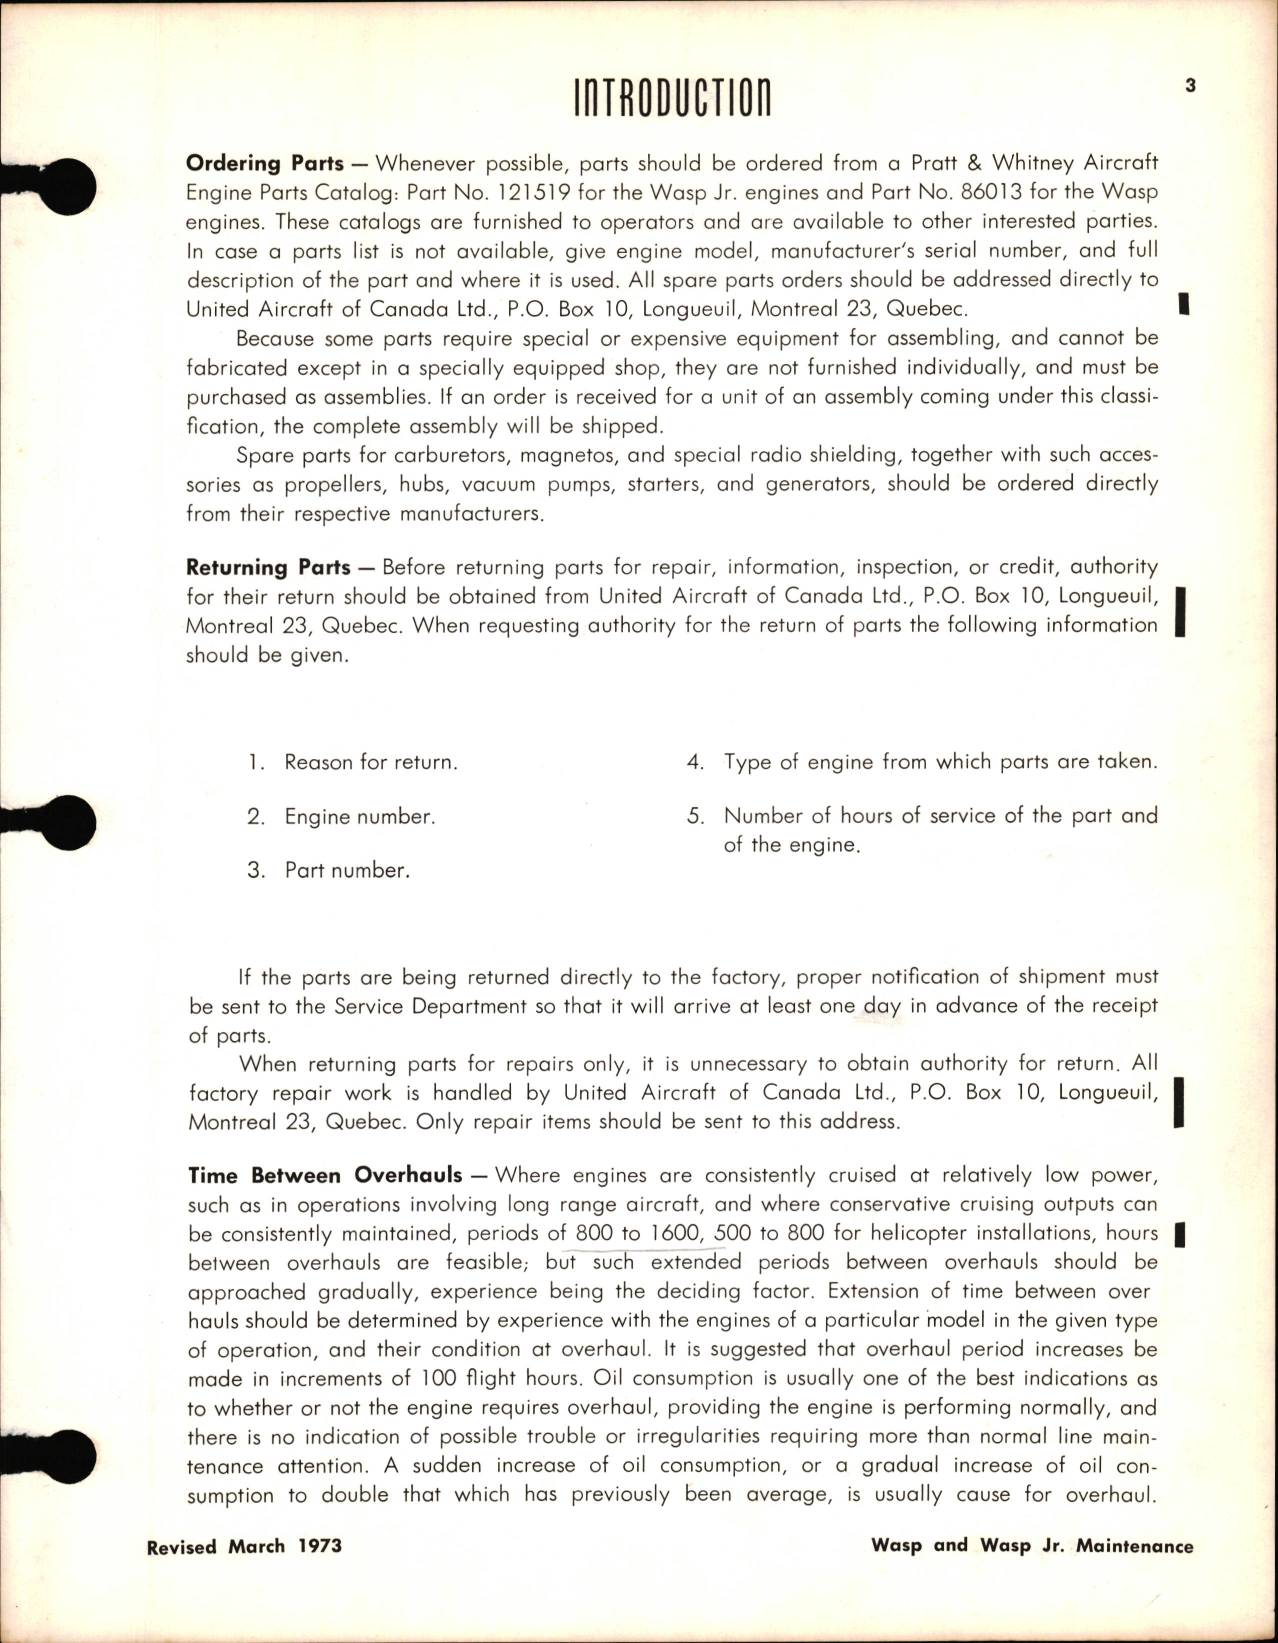 Sample page 7 from AirCorps Library document: Maintenance Manual for Wasp Jr. and Wasp Engines